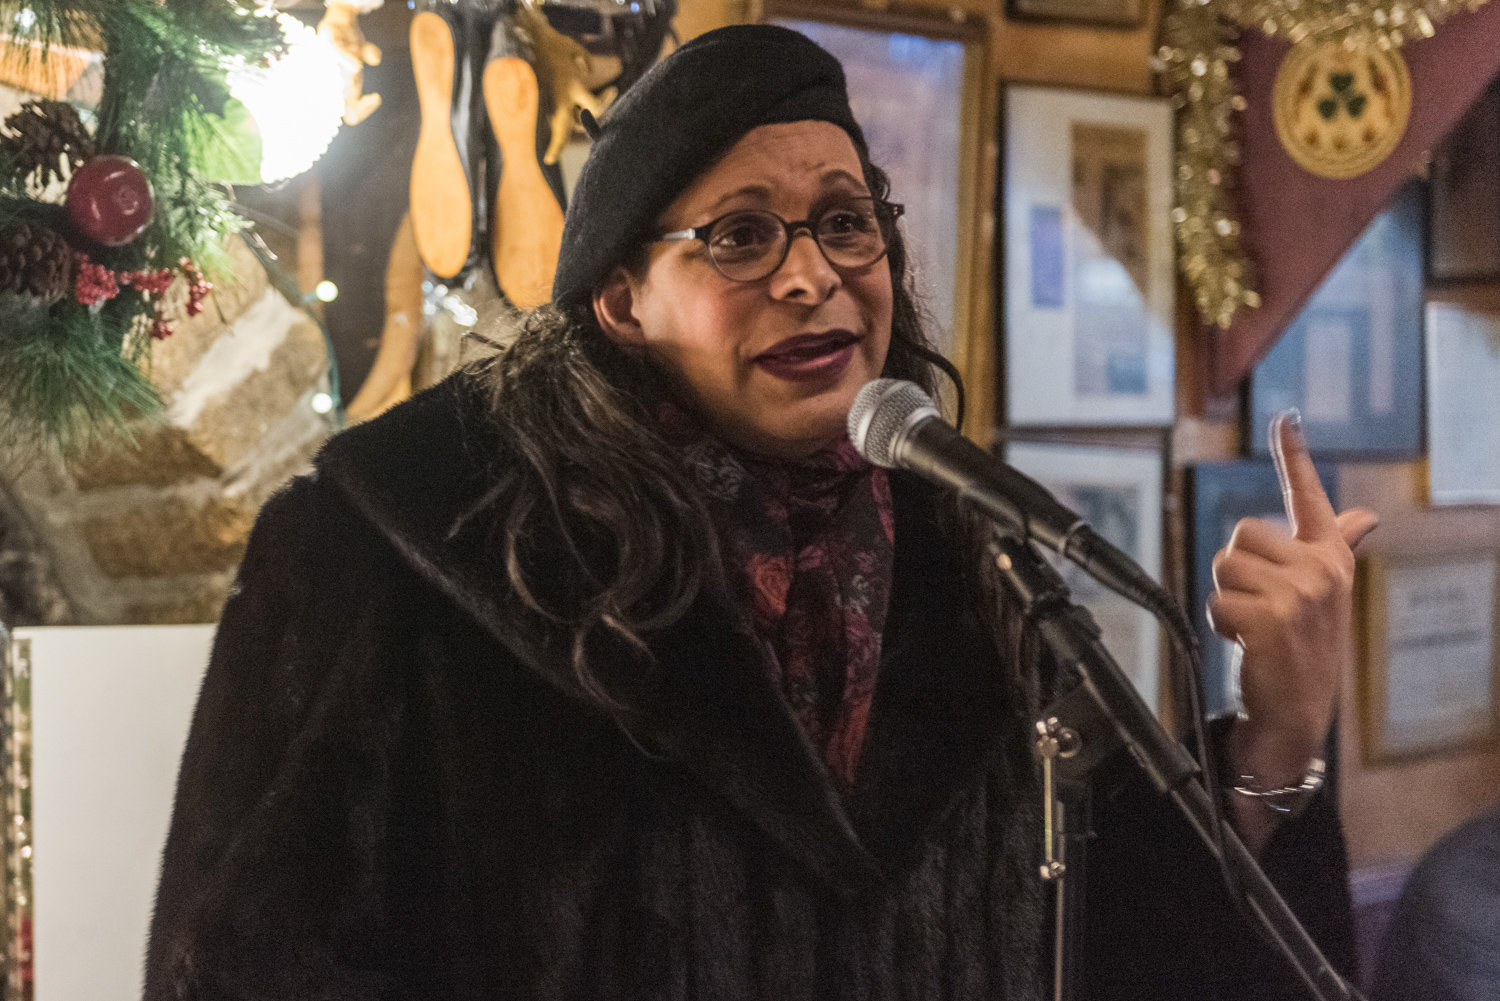 Jocelyn Carlisle performs a poem at a Dec. 11 reading marking the 10-year anniversary of the Poor Mouth Writer’s Night at An Beal Bocht Cafe.